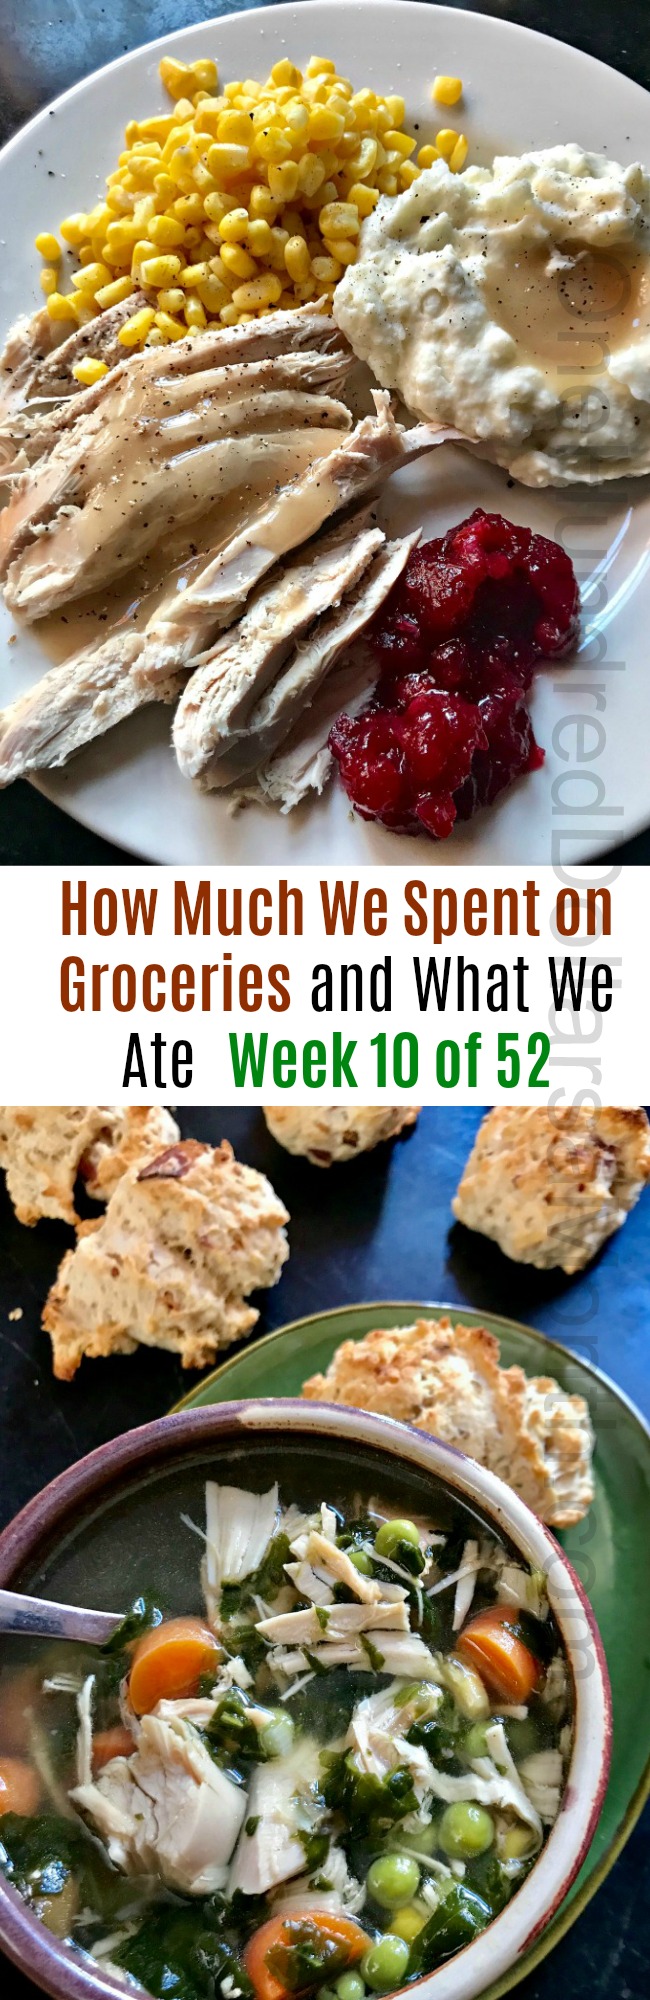 How Much We Spent on Groceries and What We Ate – Week 10 of 52